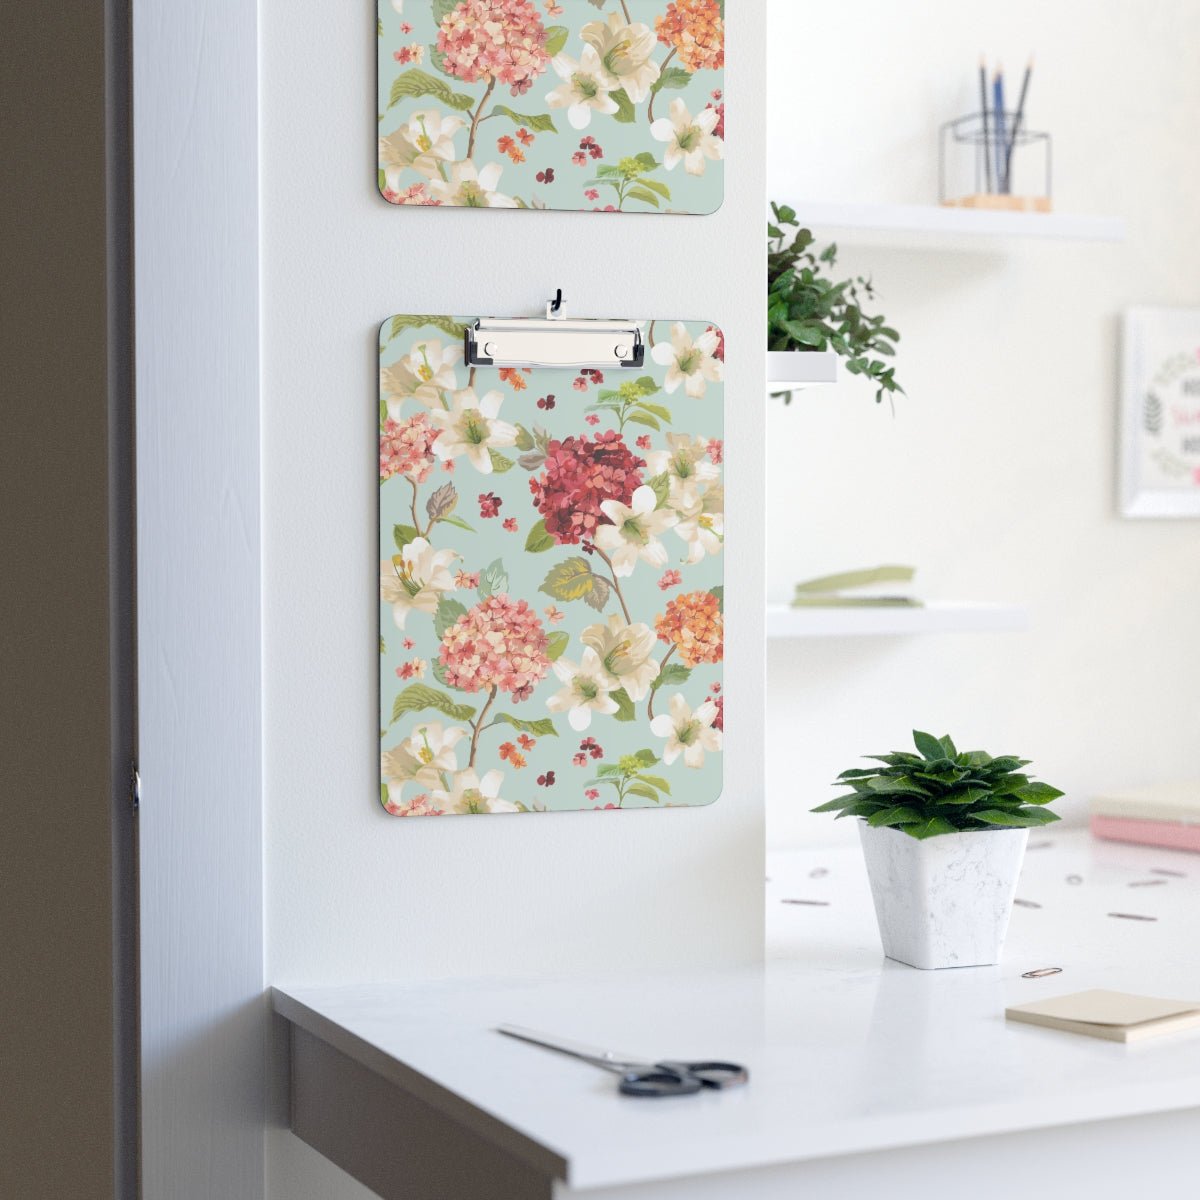 Autumn Hortensia and Lily Flowers Clipboard - Puffin Lime